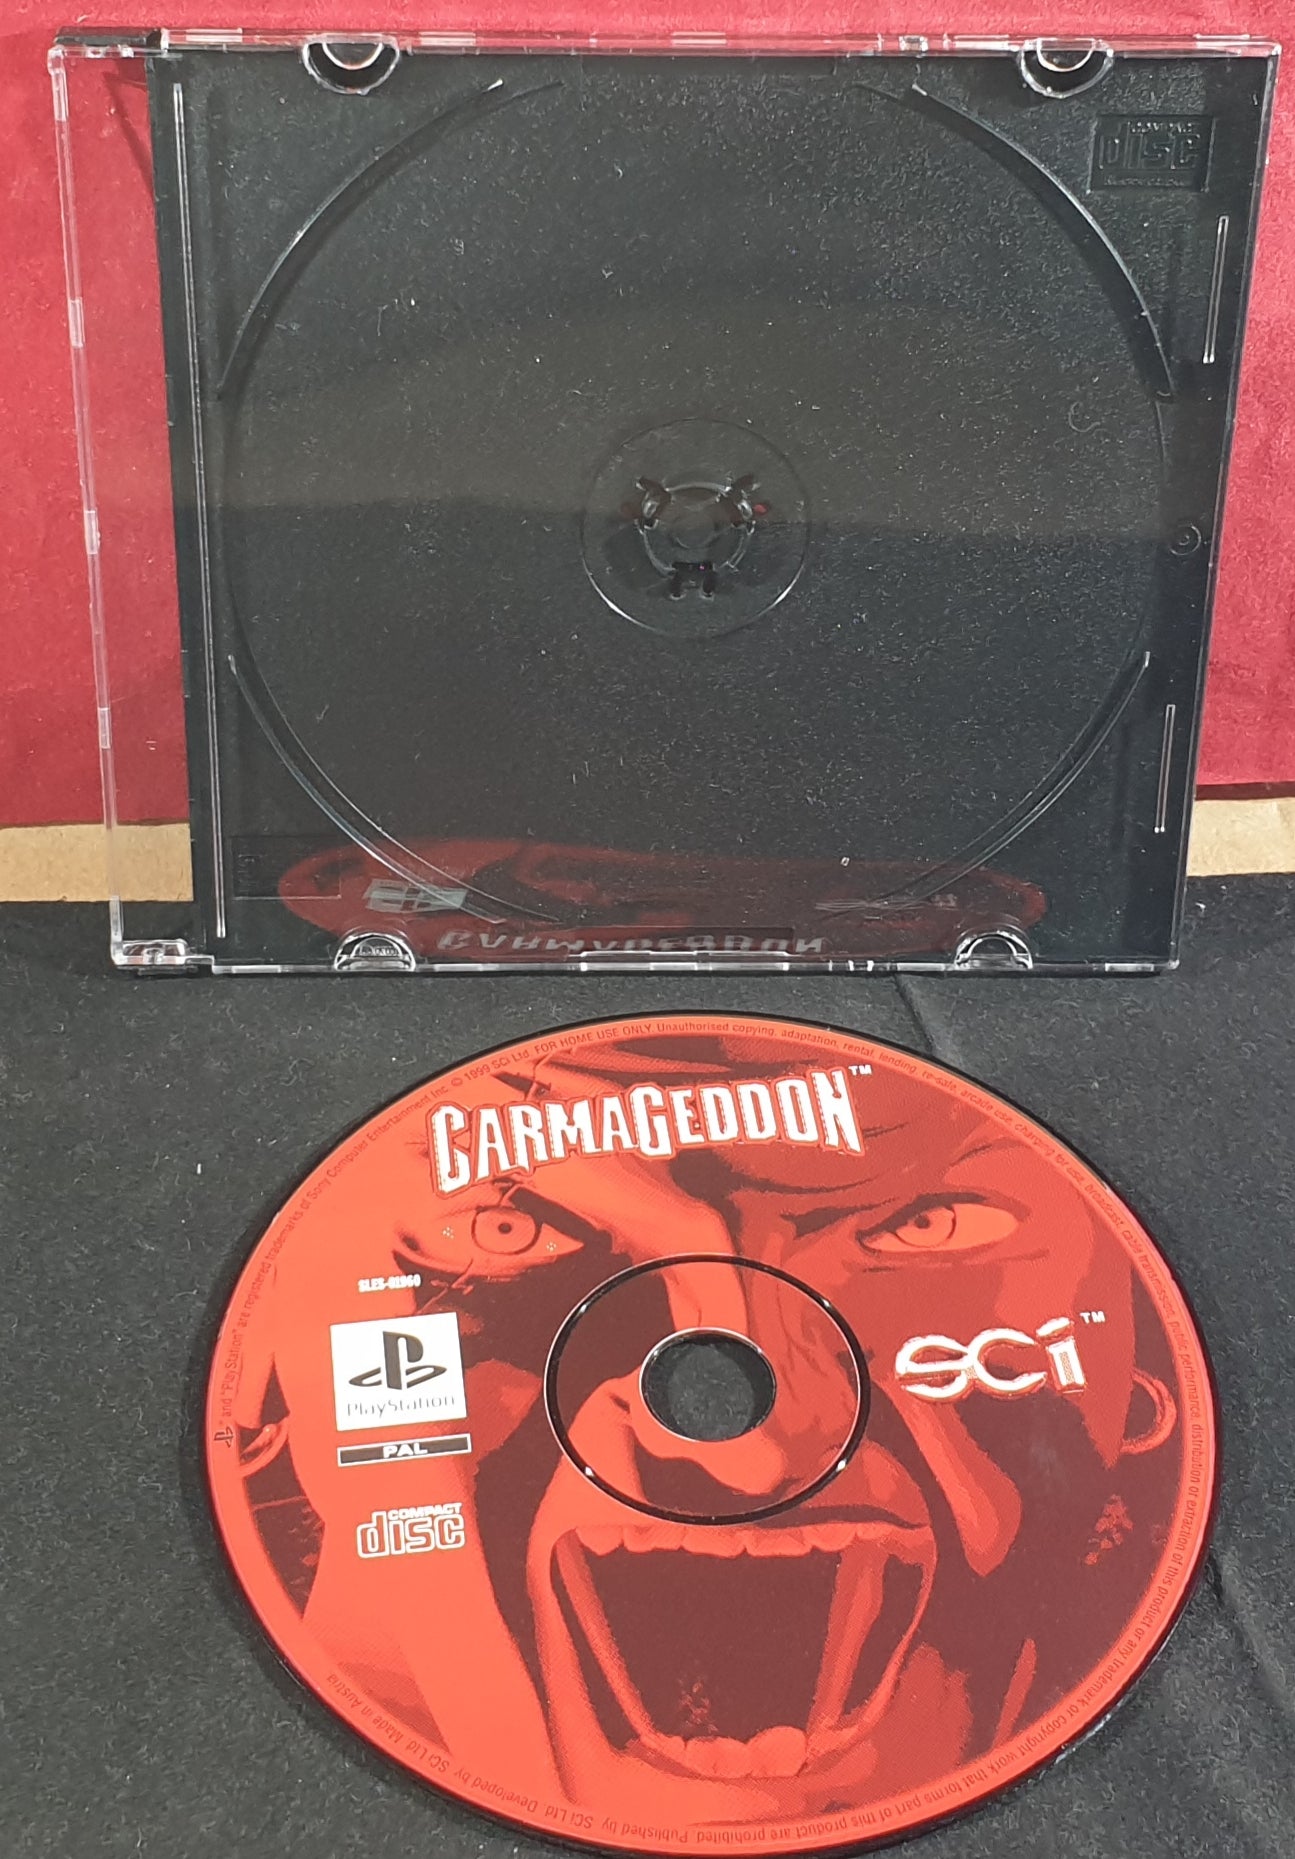 Carmageddon Sony Playstation 1 (PS1) Game Disc Only